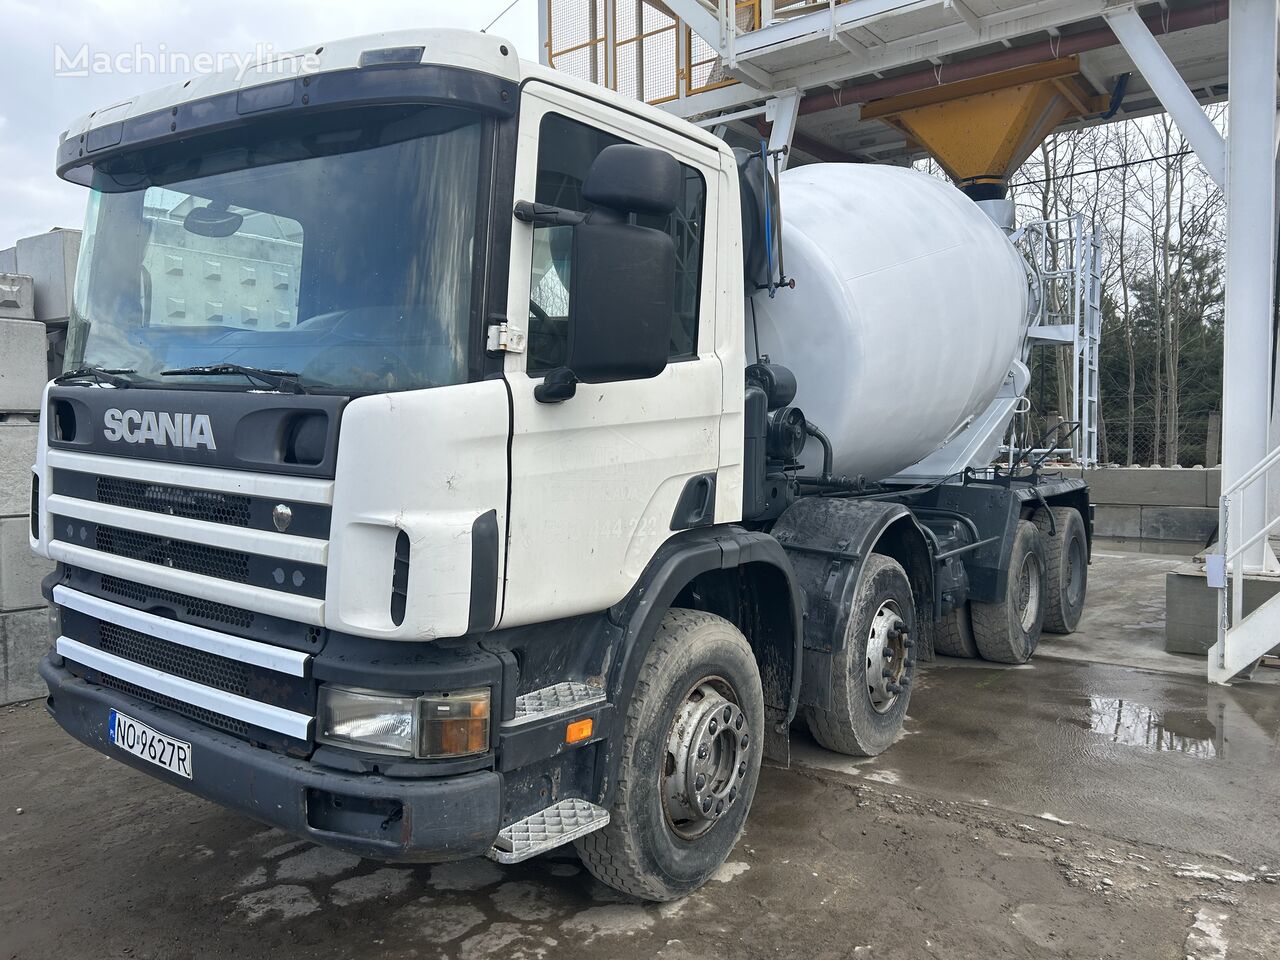 Liebherr  on chassis Scania 124 concrete mixer truck